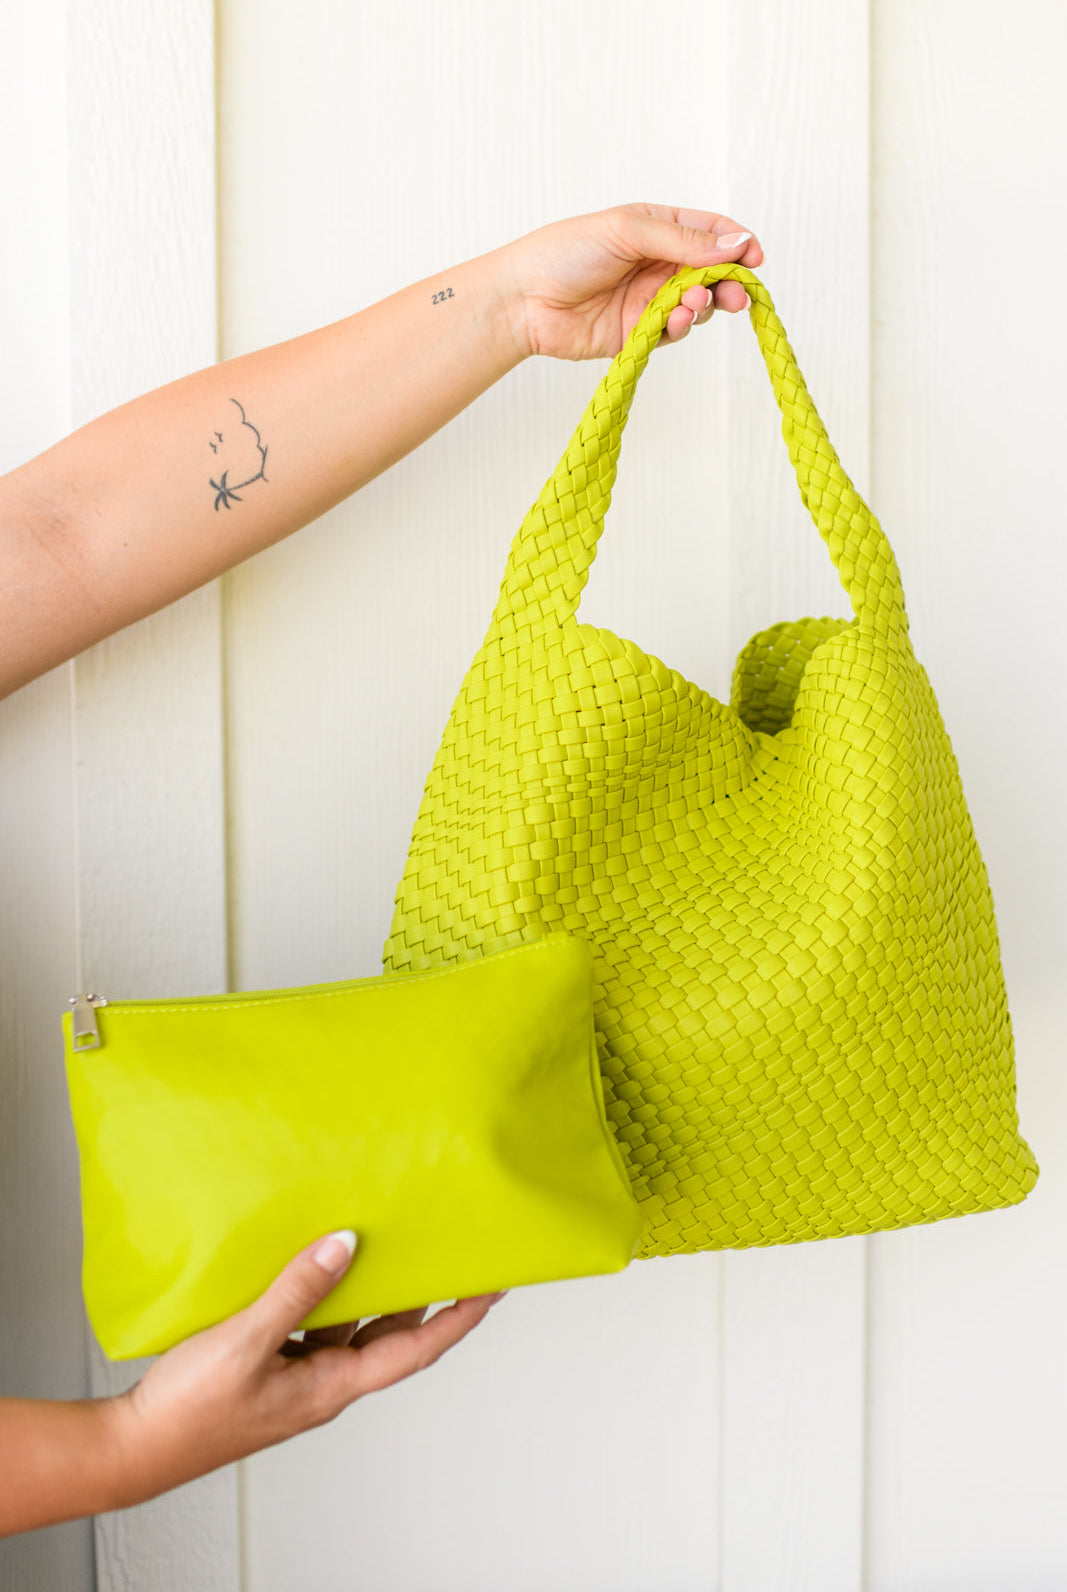 Woven and Worn Tote in Citron-Accessories- Simply Simpson's Boutique is a Women's Online Fashion Boutique Located in Jupiter, Florida